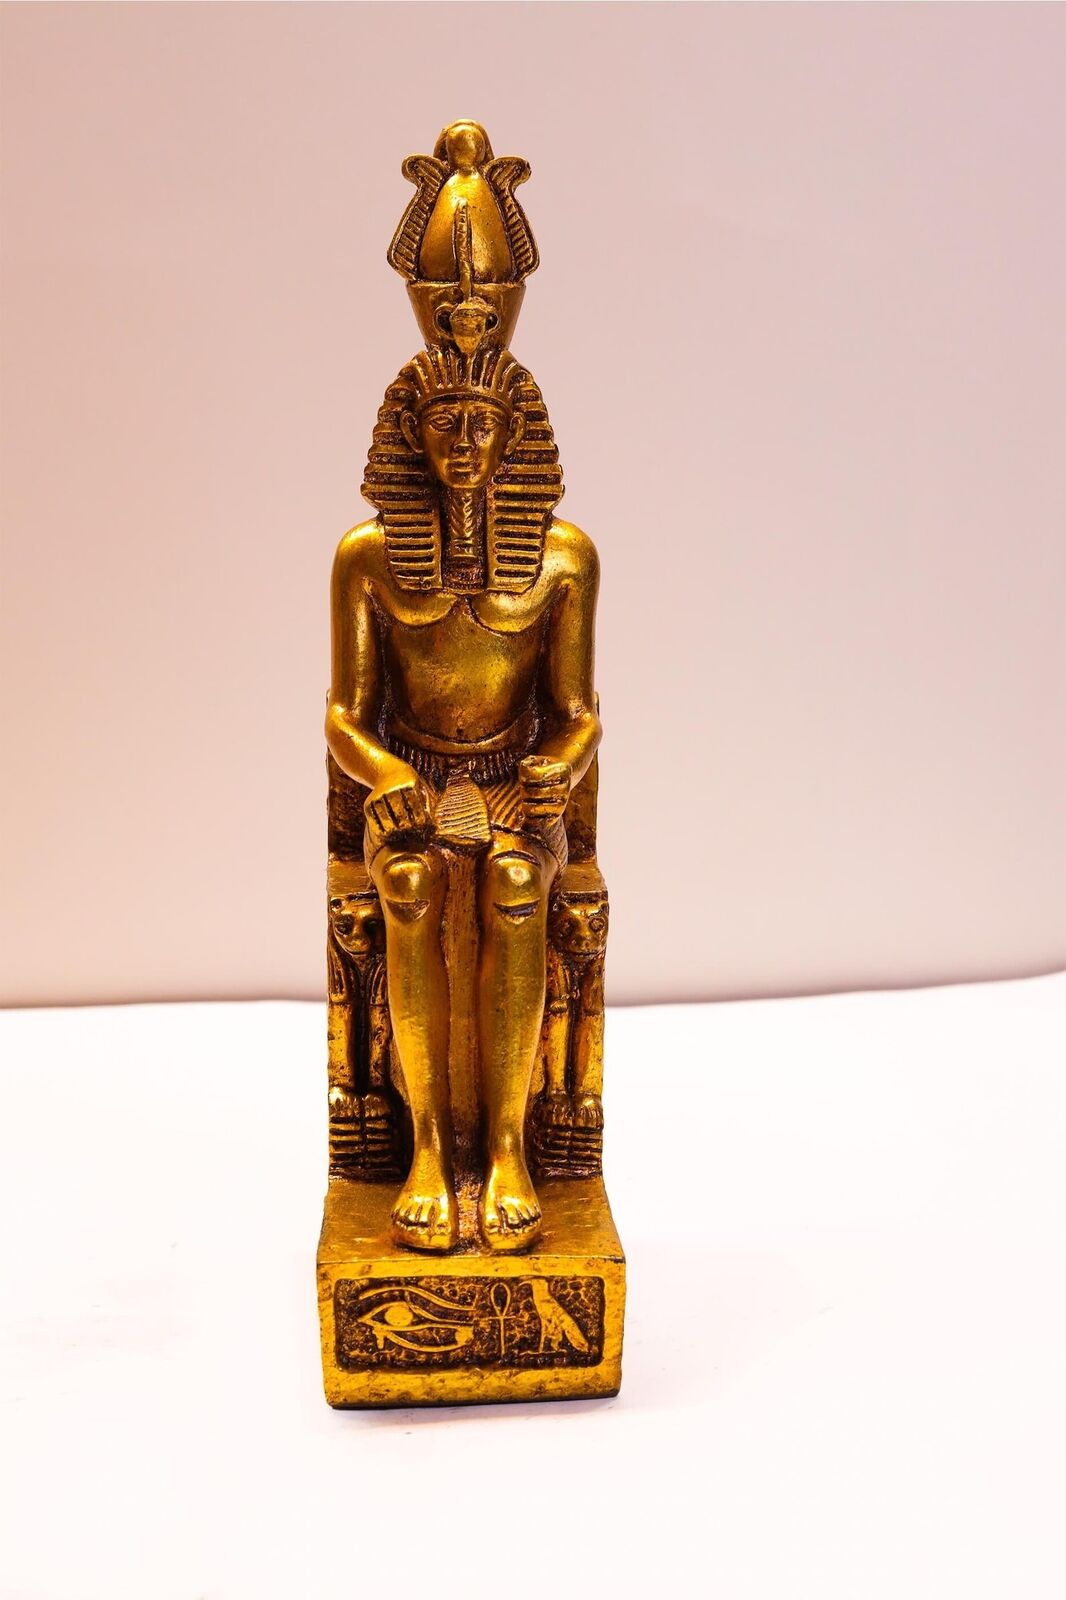 Ramesses II statue, Ramesses the Great statue for sale - made in Egypt